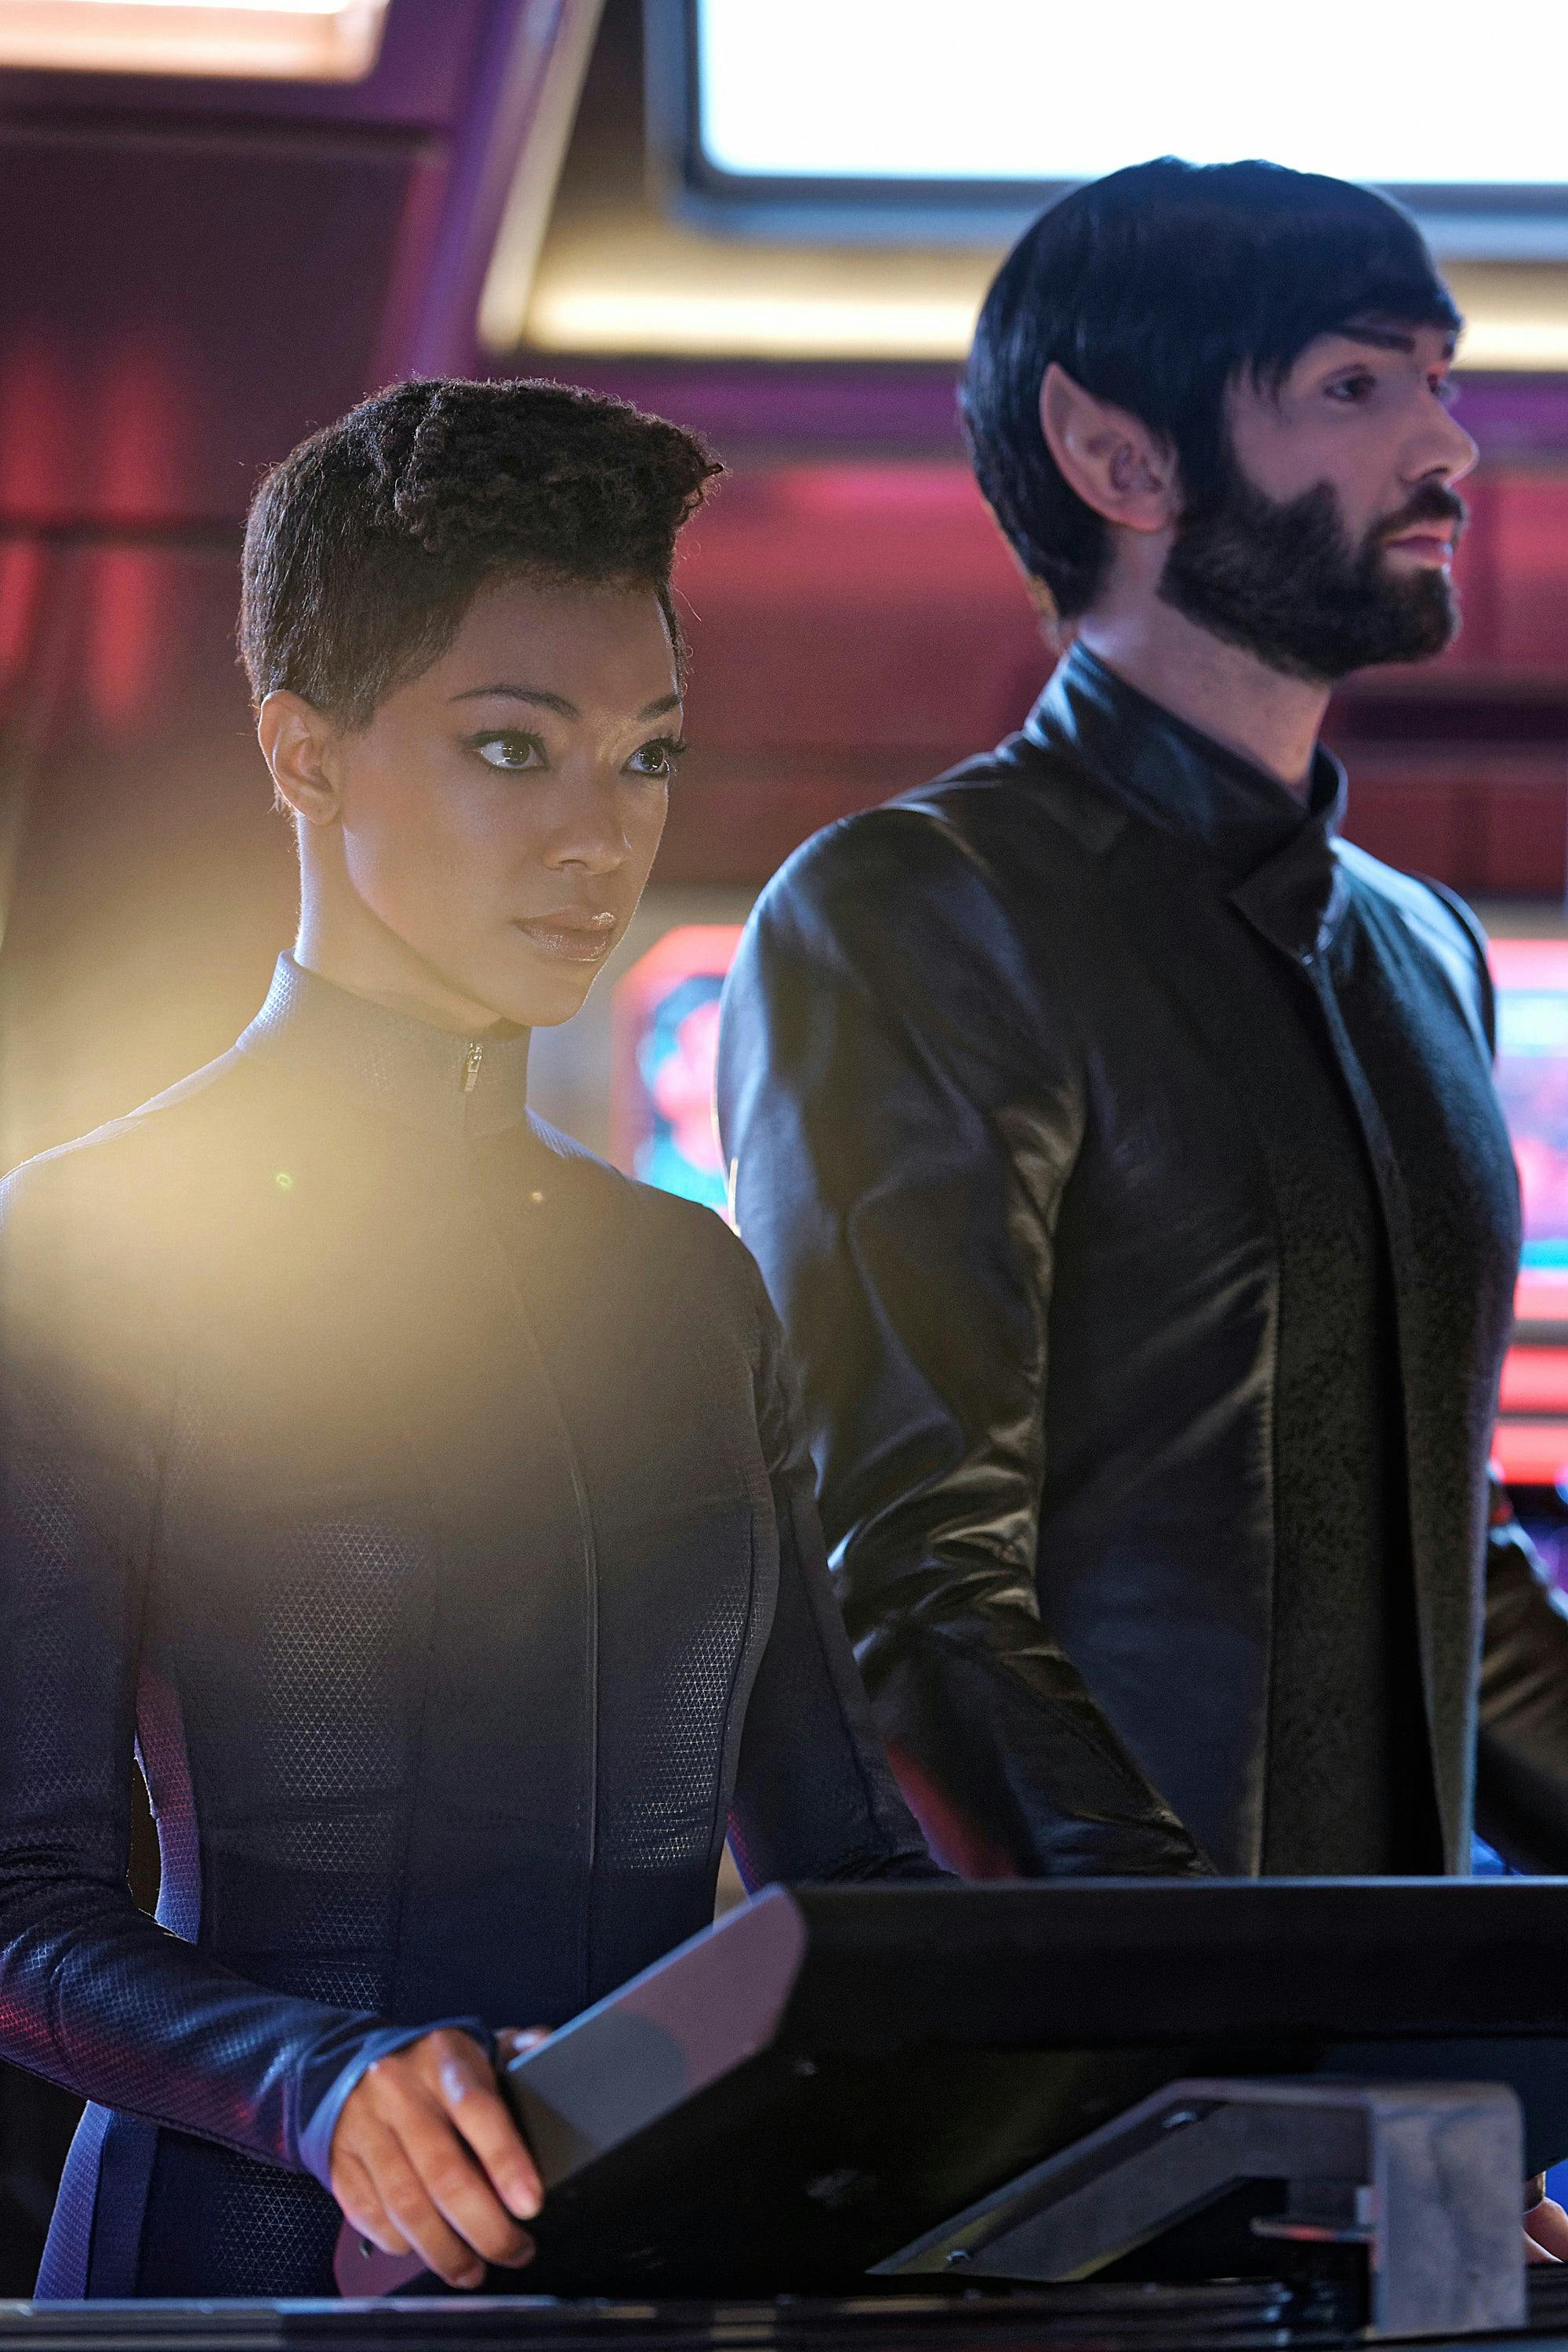 Michael Burnham and Spock stand side-by-side at their station on the Bridge of the Discovery in 'Such Sweet Sorrow'